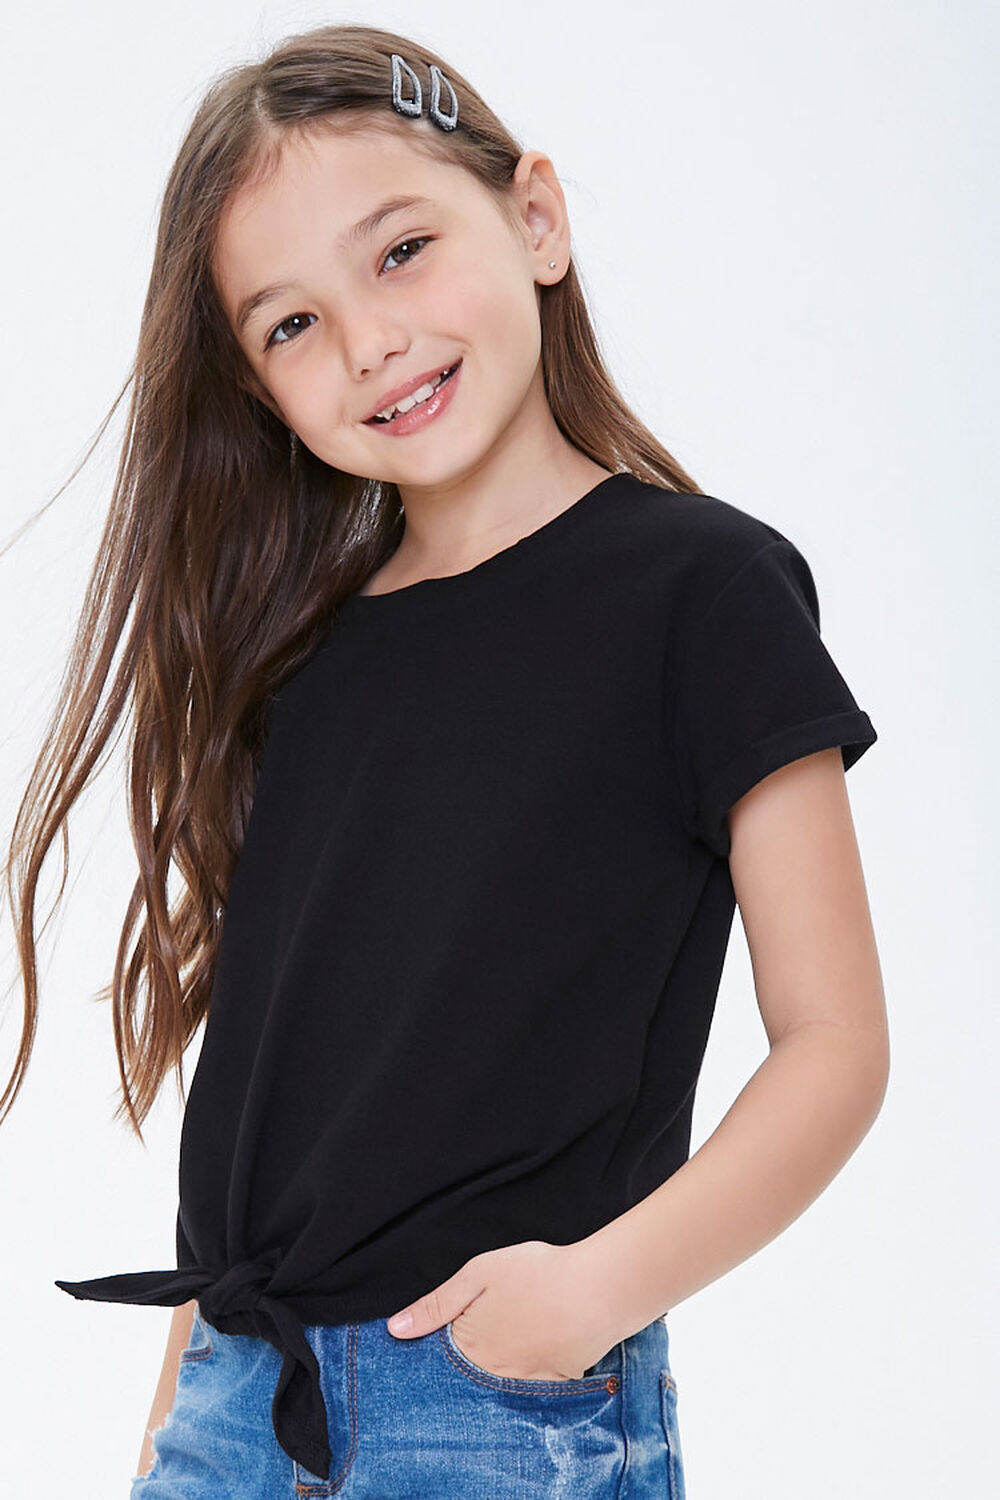 Girls Knotted Tee (Kids)